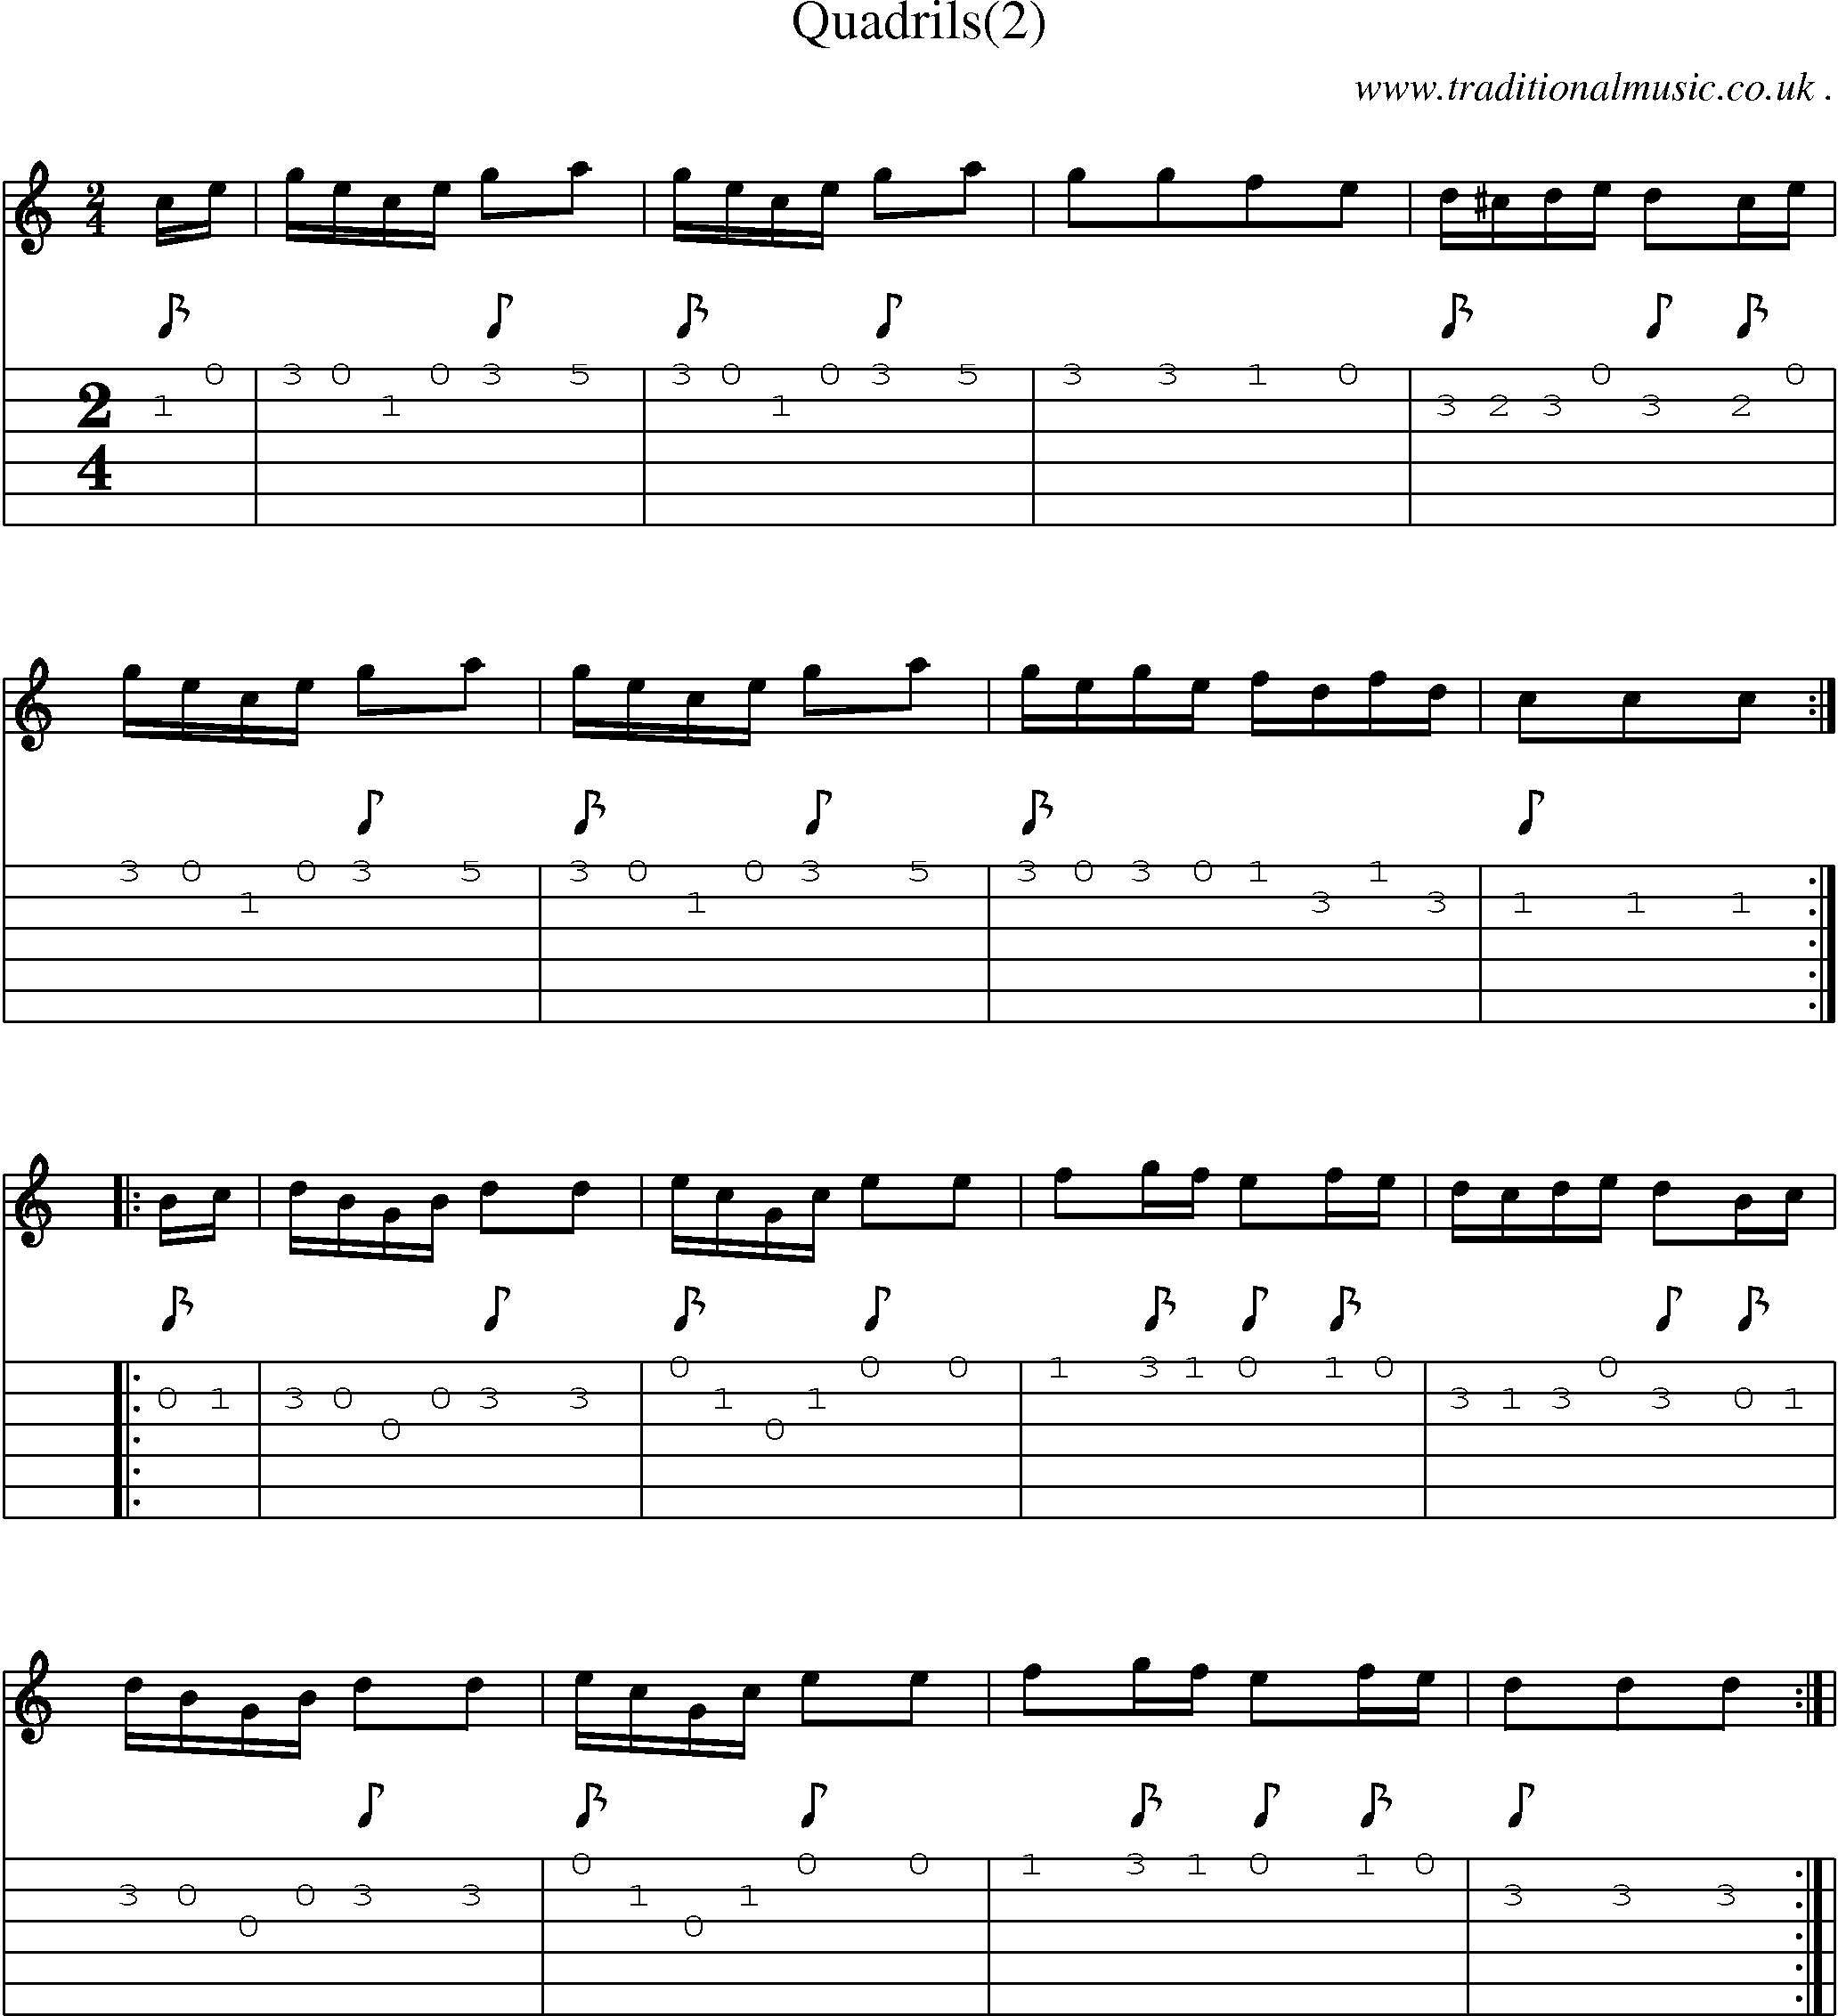 Sheet-Music and Guitar Tabs for Quadrils(2)